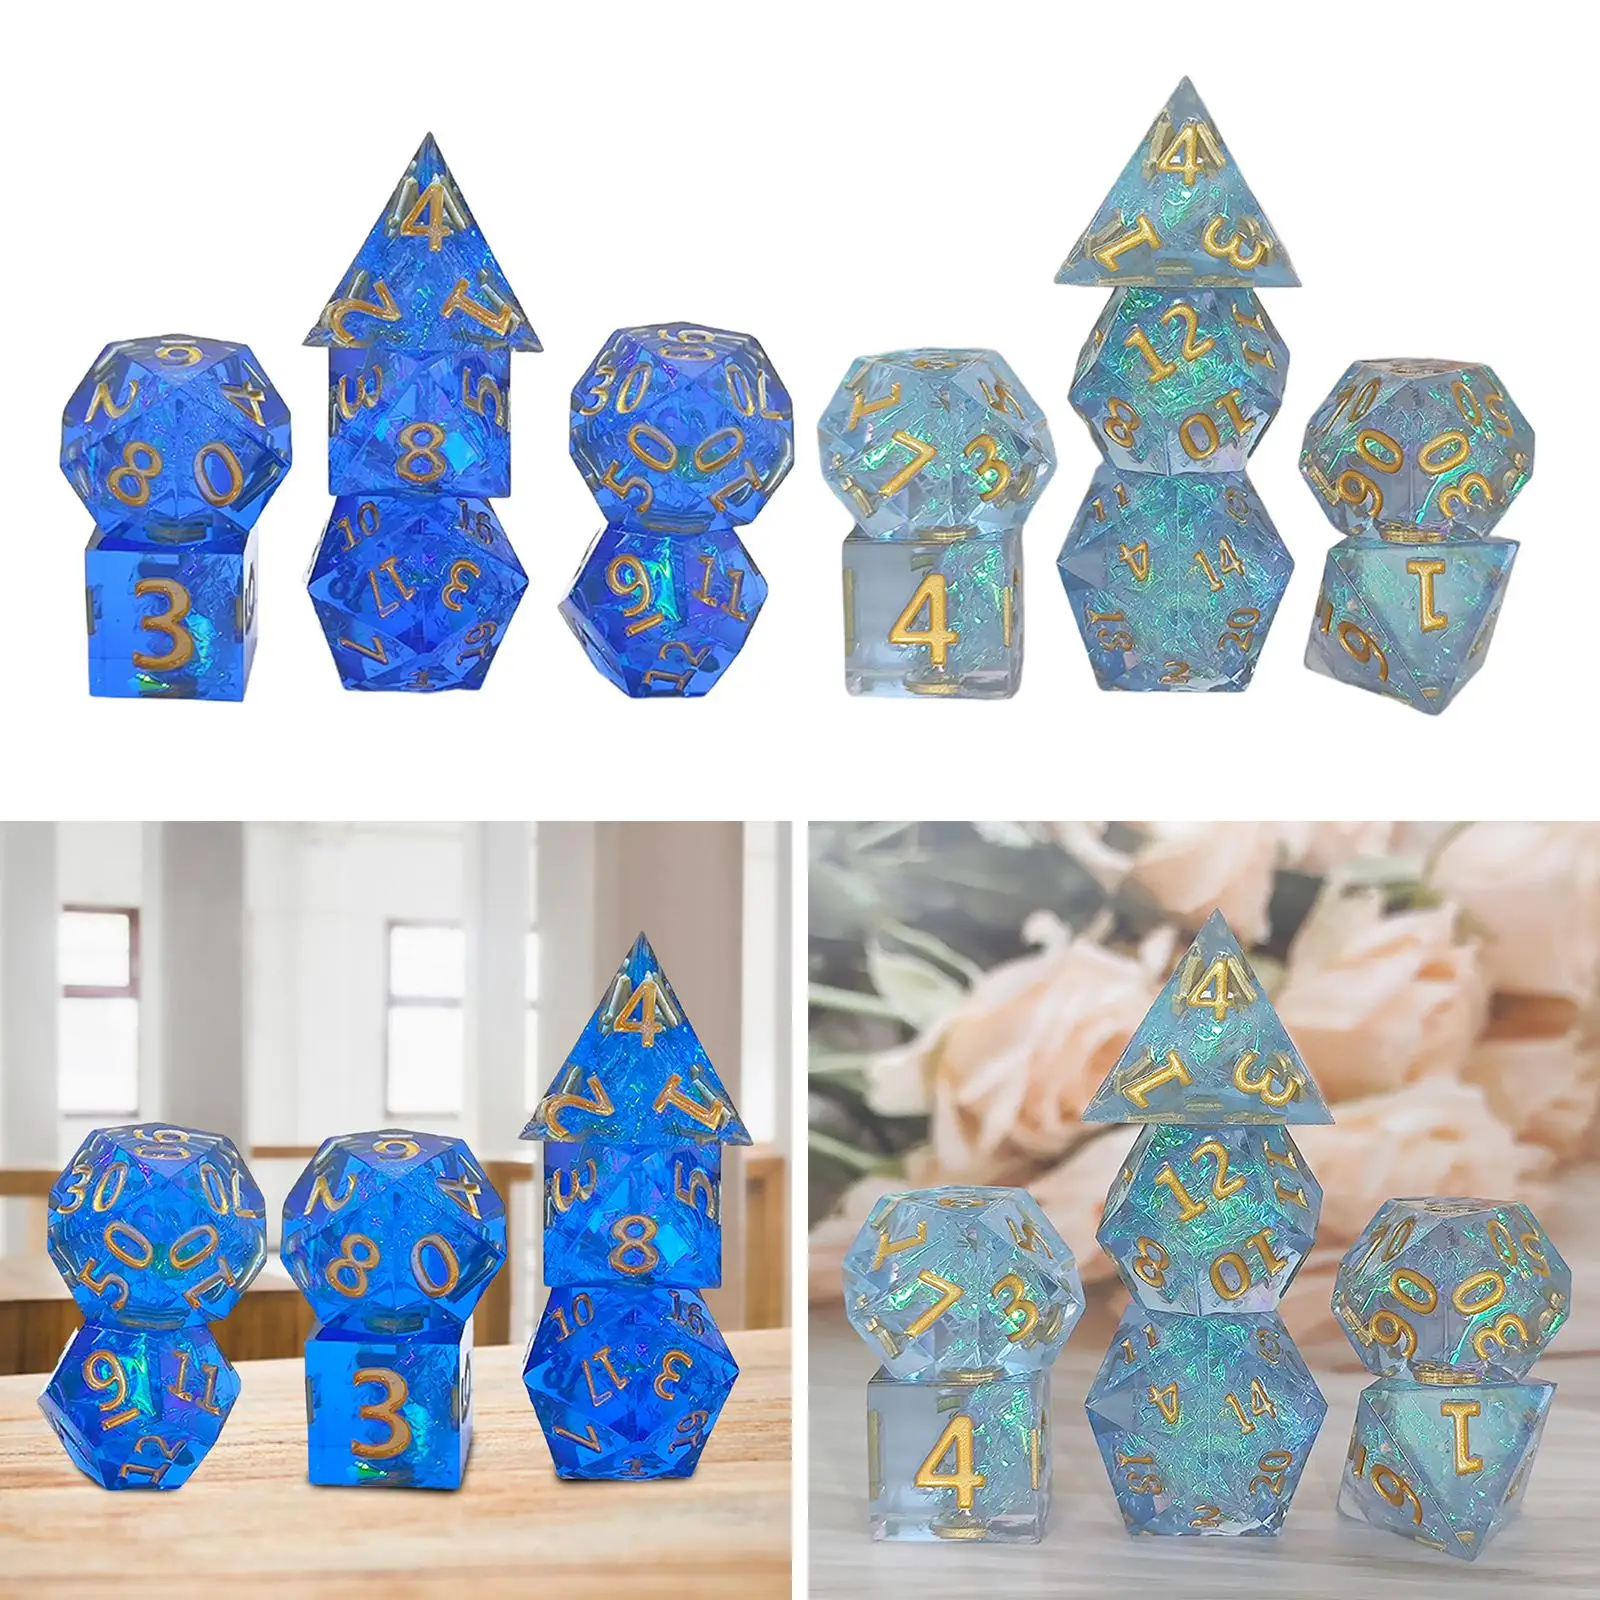 7 Pieces Digital  Party Supplies  Polyhedral  for Adults